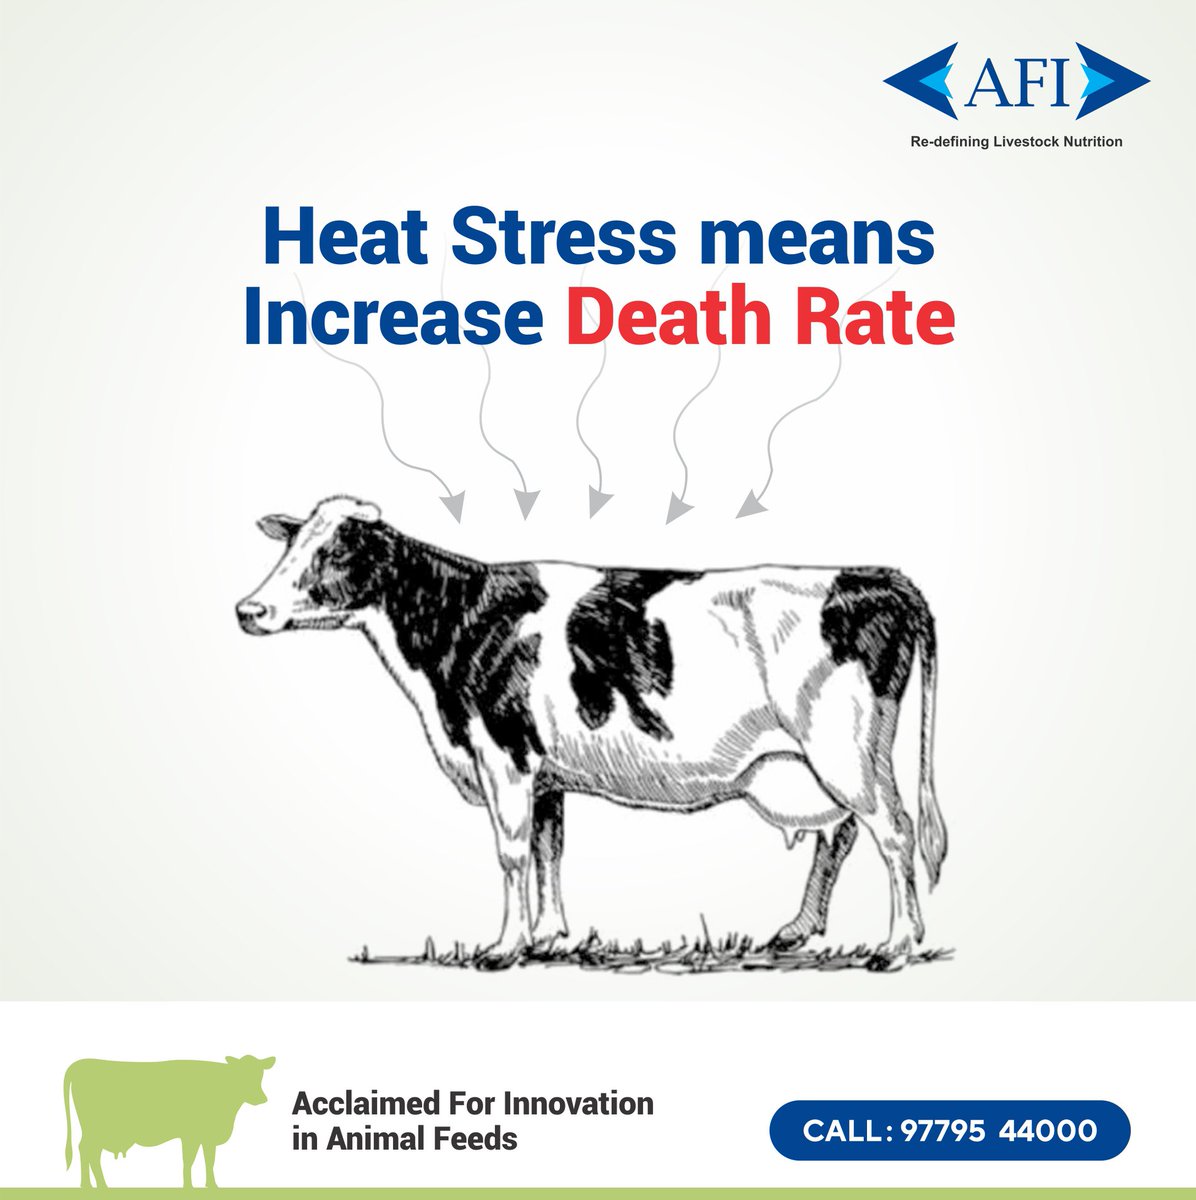 Heat stress also leads to increased lameness, disease incidence, days open and death rates. For more information, Call - 9779544000